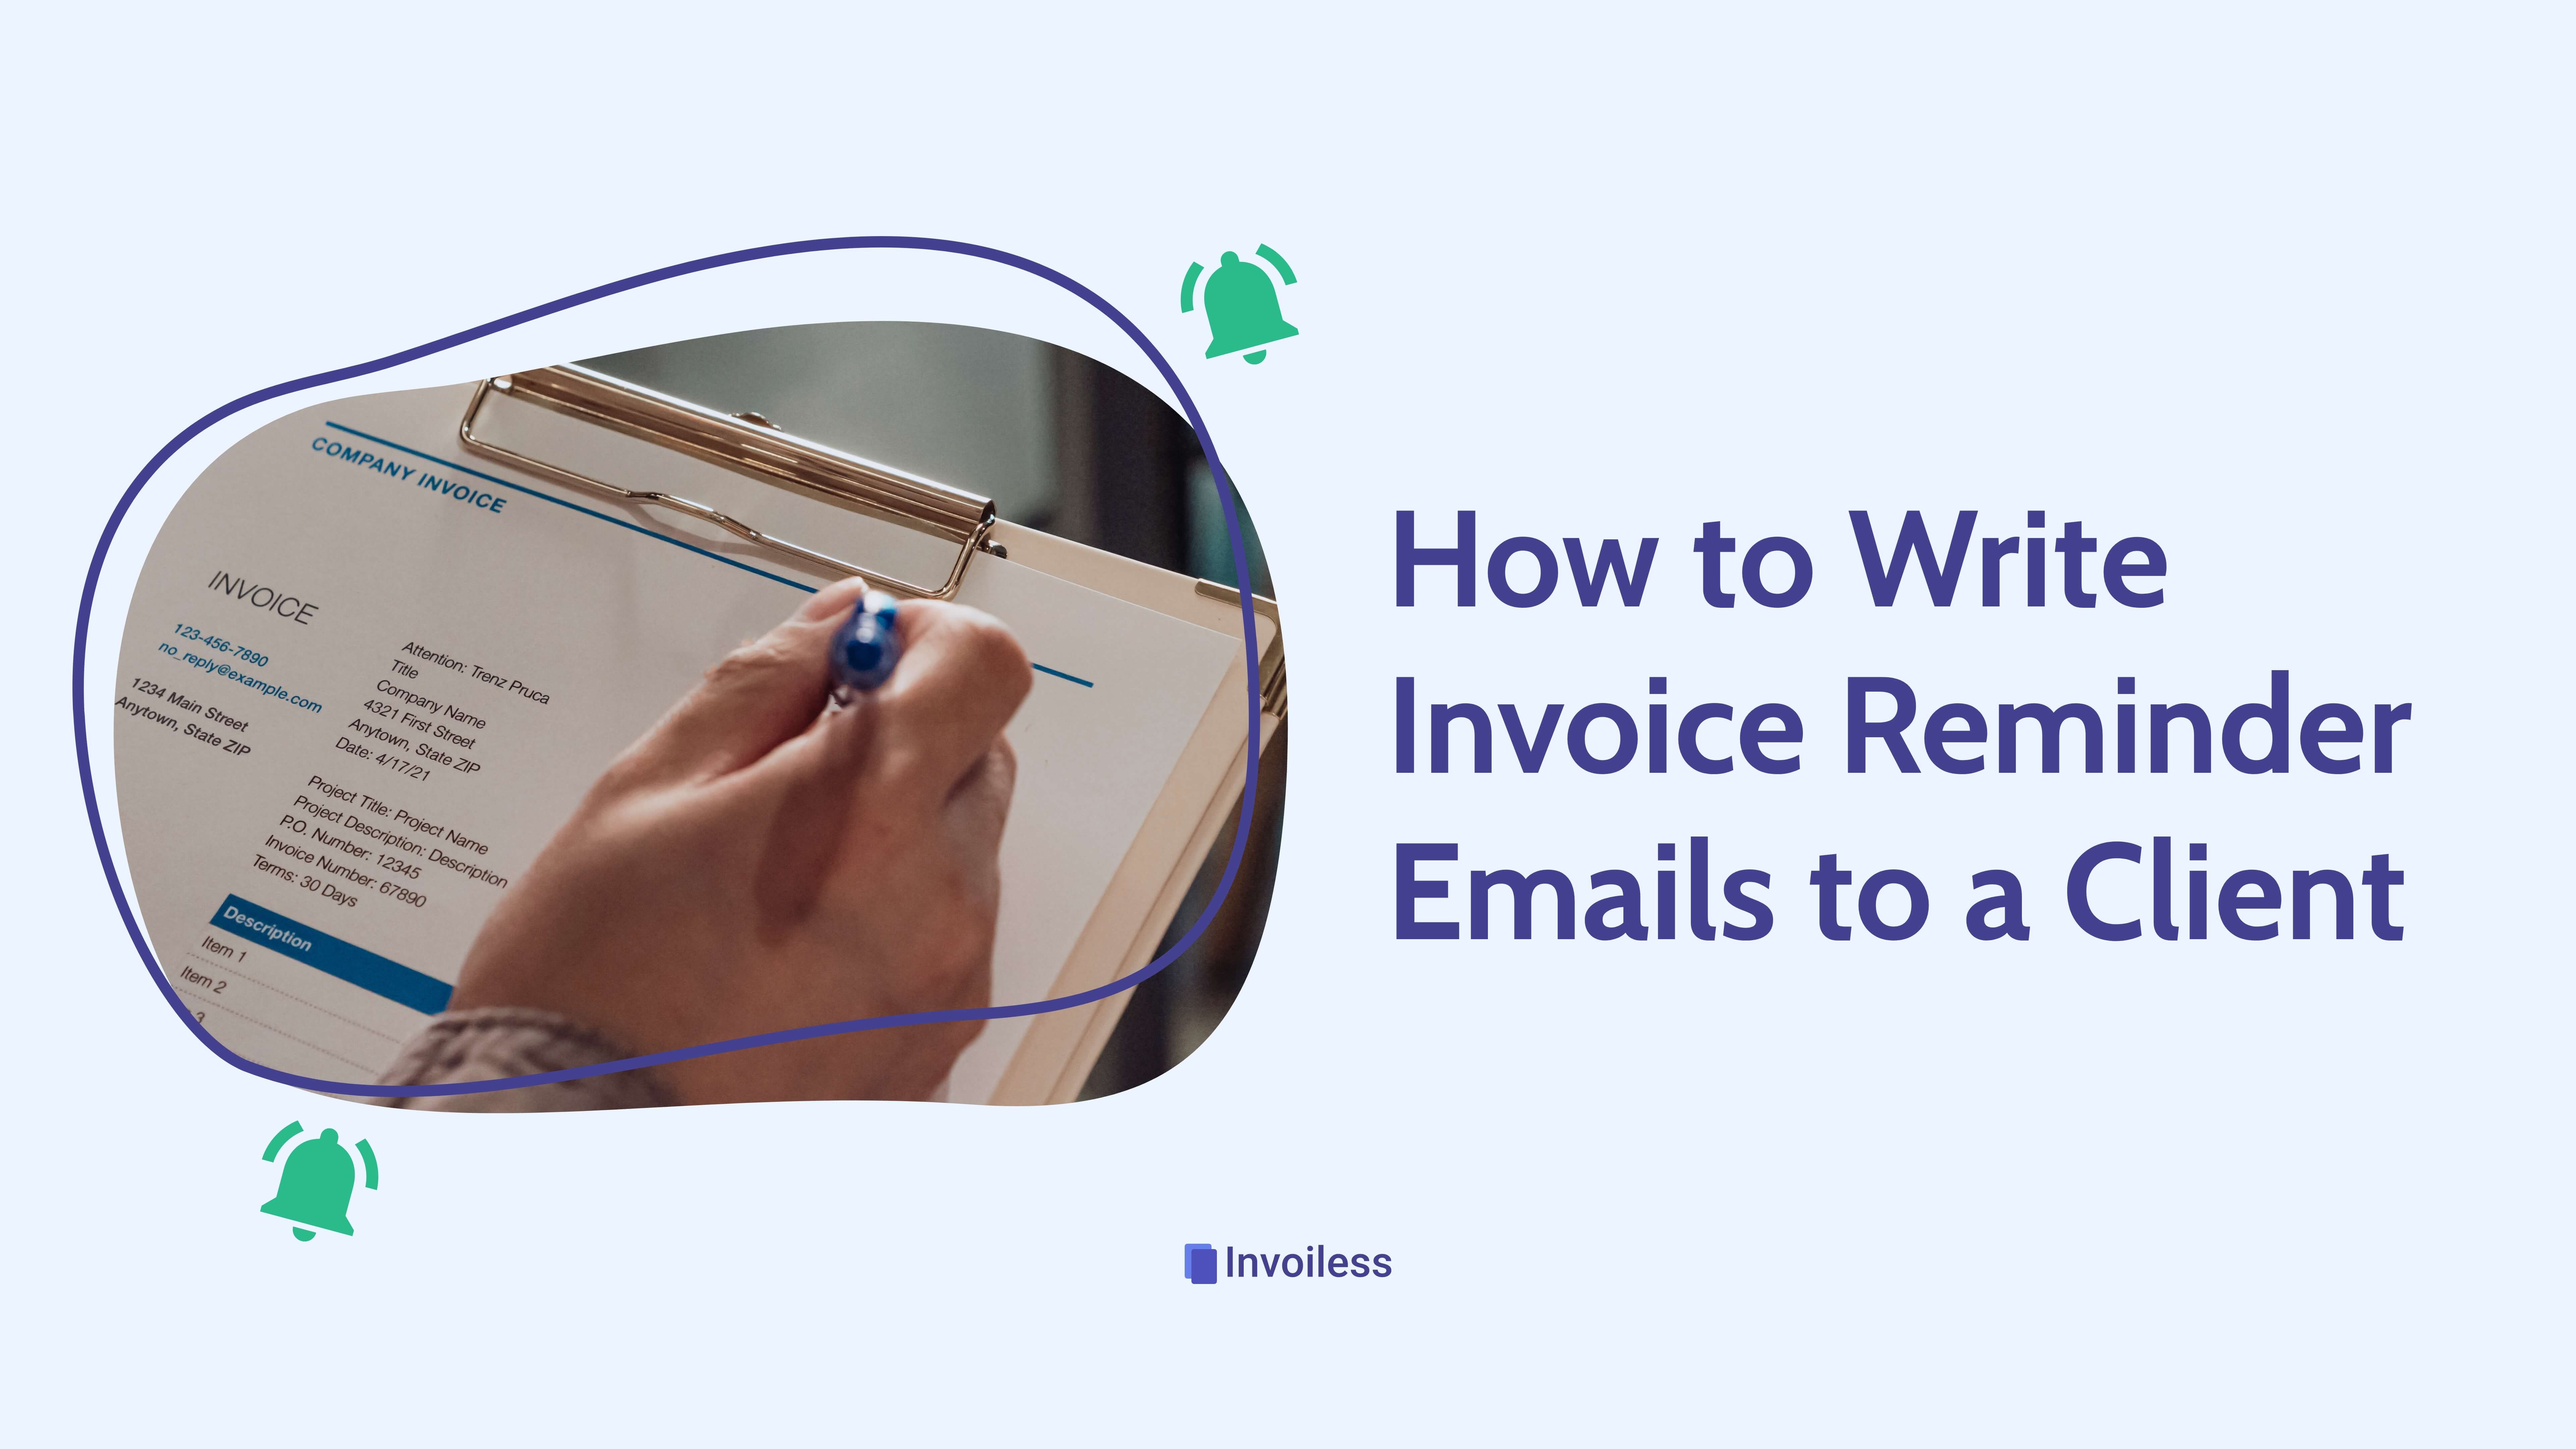 How to Write Invoice Reminder Emails to a Client?